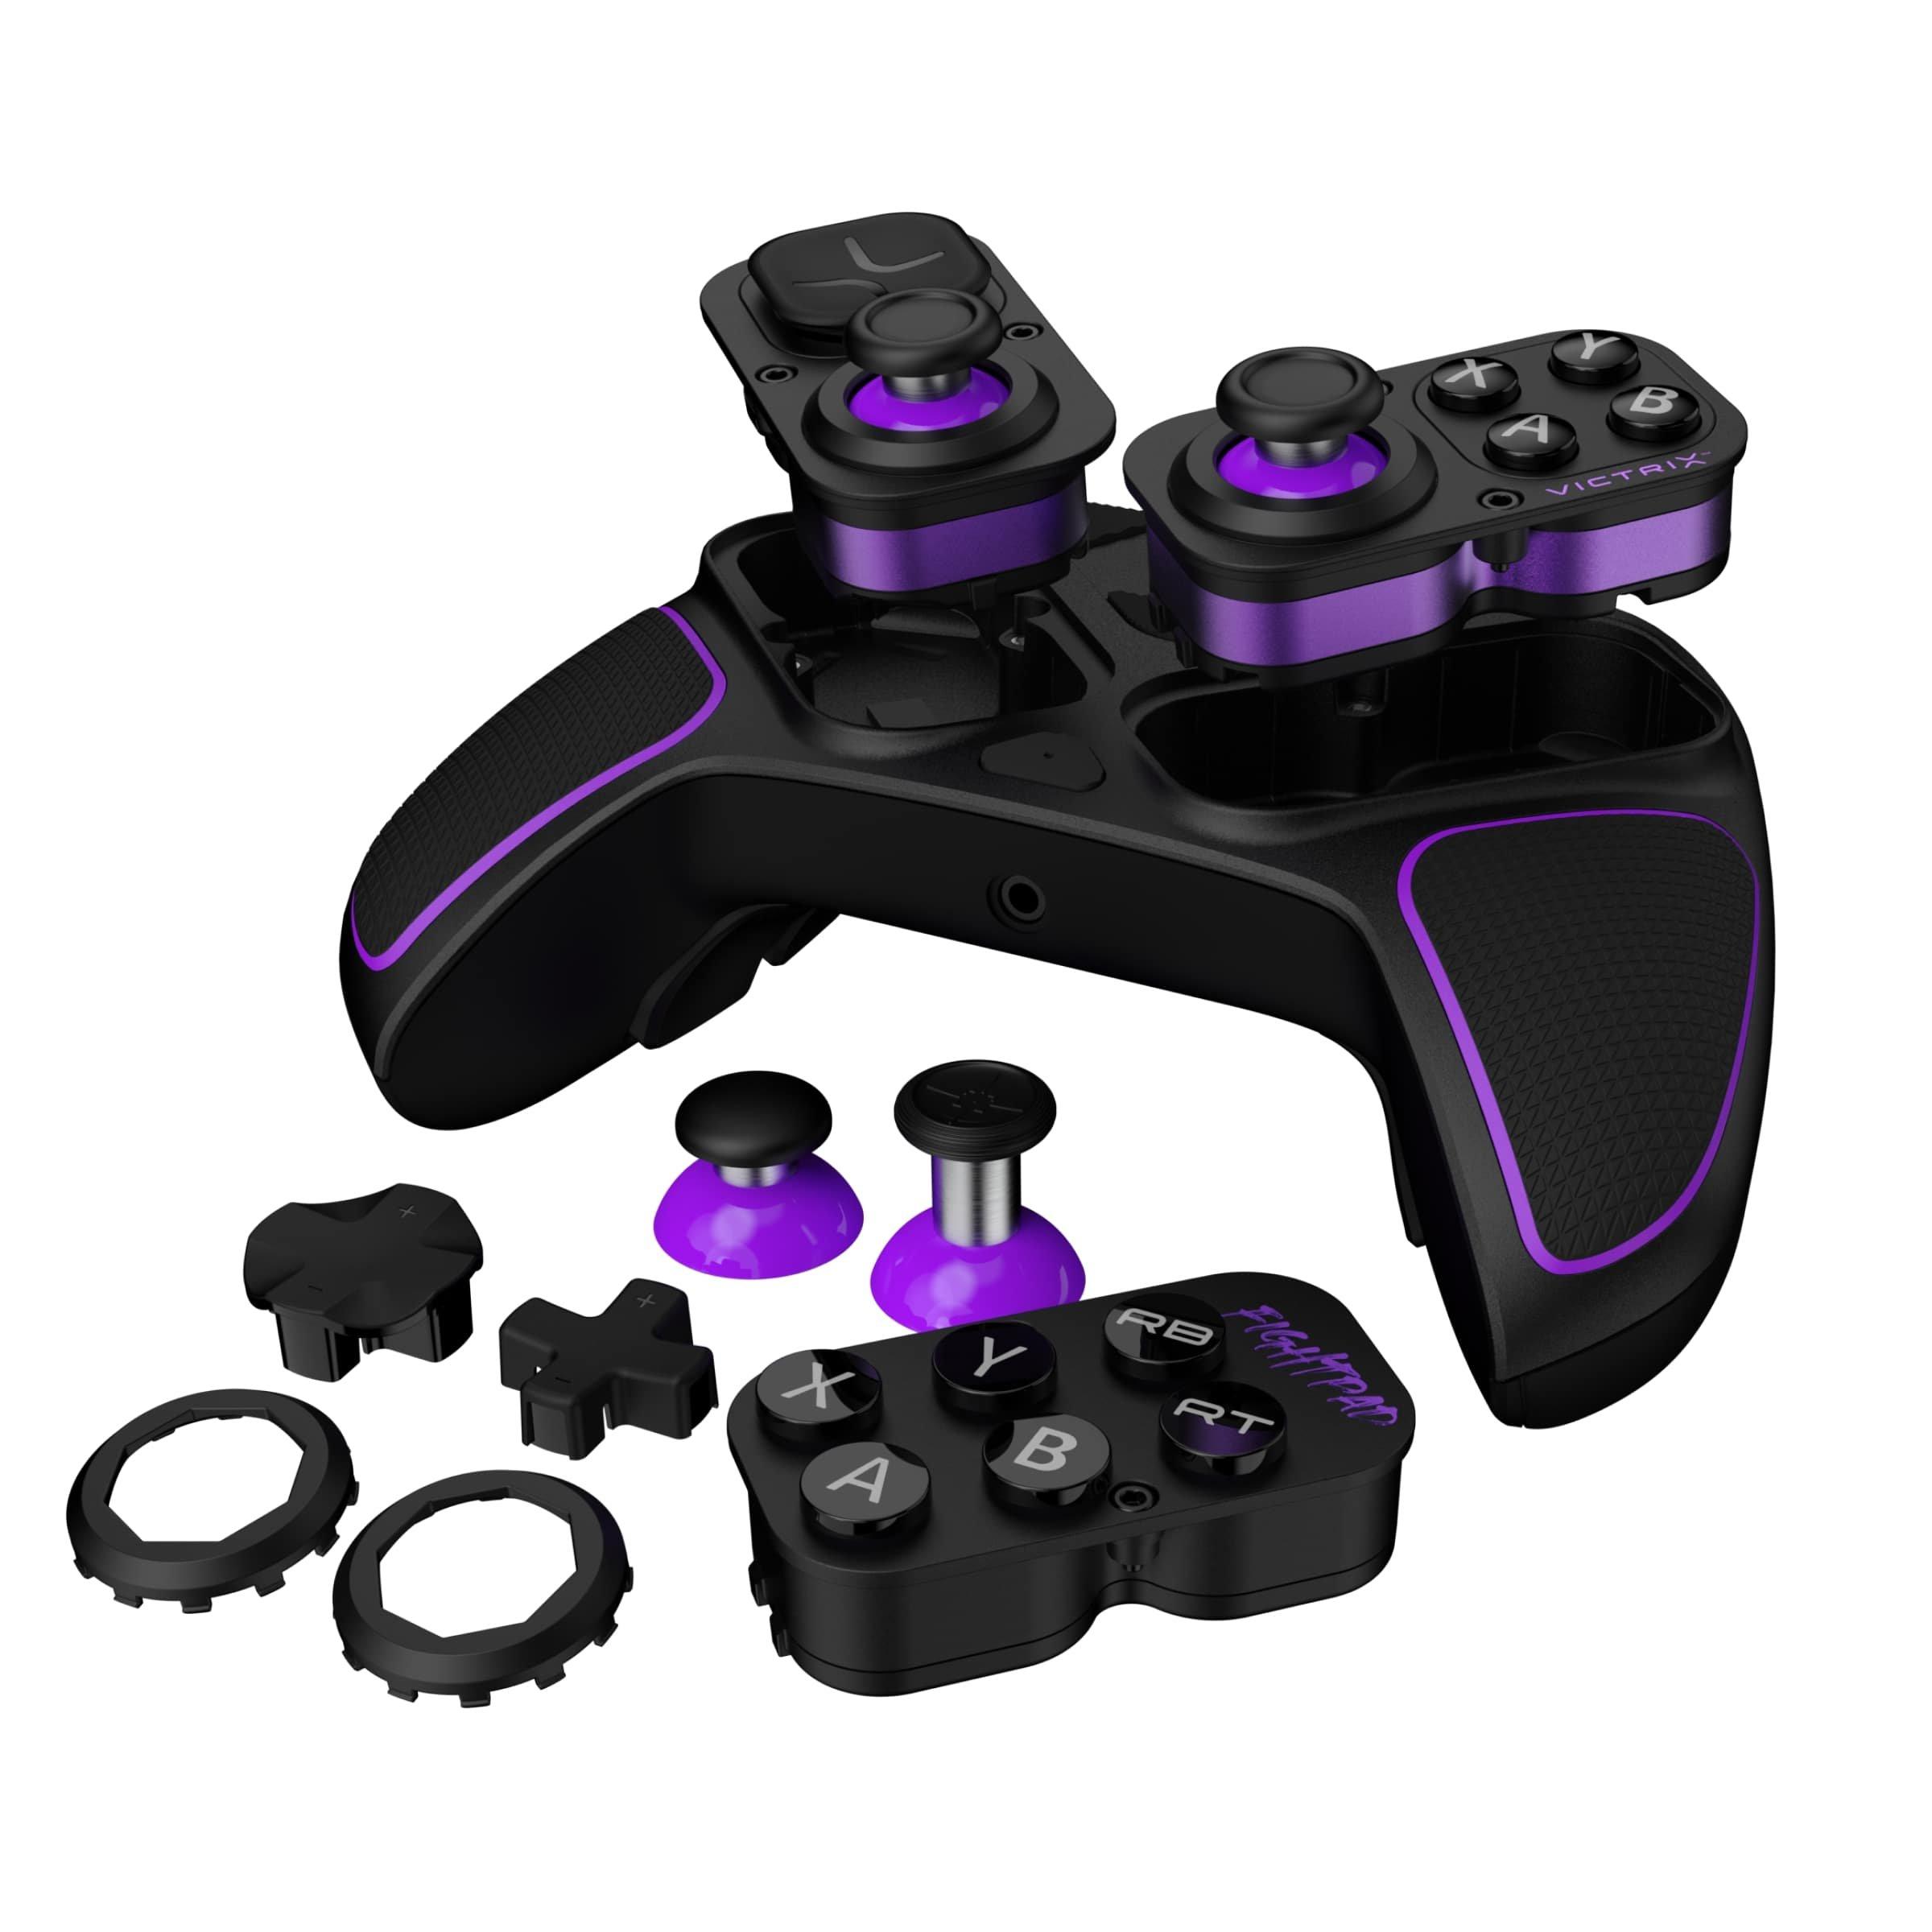 Victrix Pro BFG Wireless Controllerスマホ・タブレット・パソコン